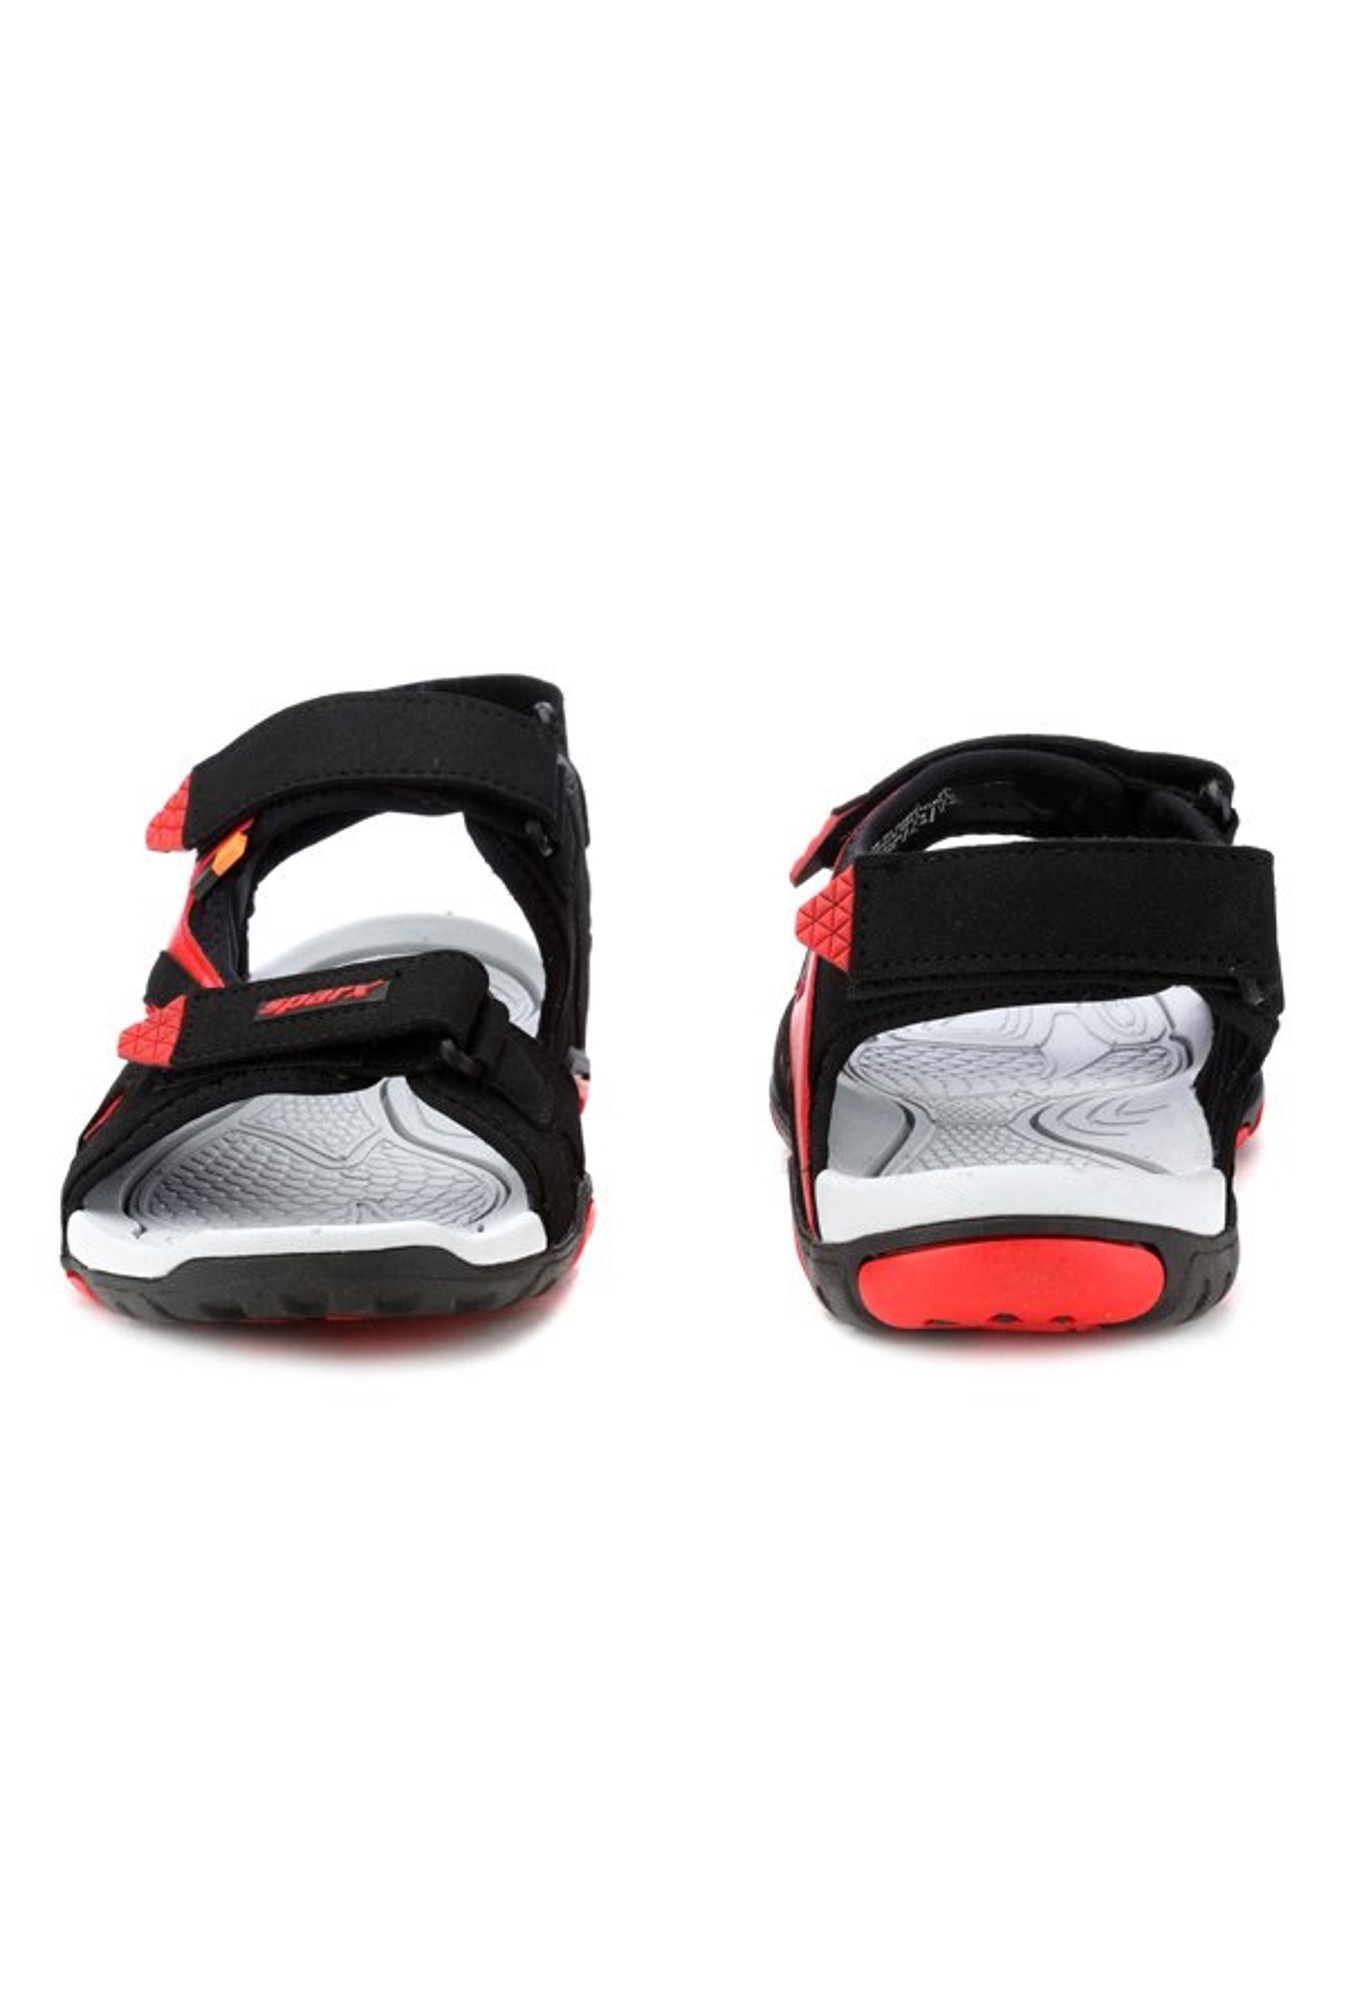 2021 Lowest Price] Sparx Sandals Men Black Red Price in India &  Specifications